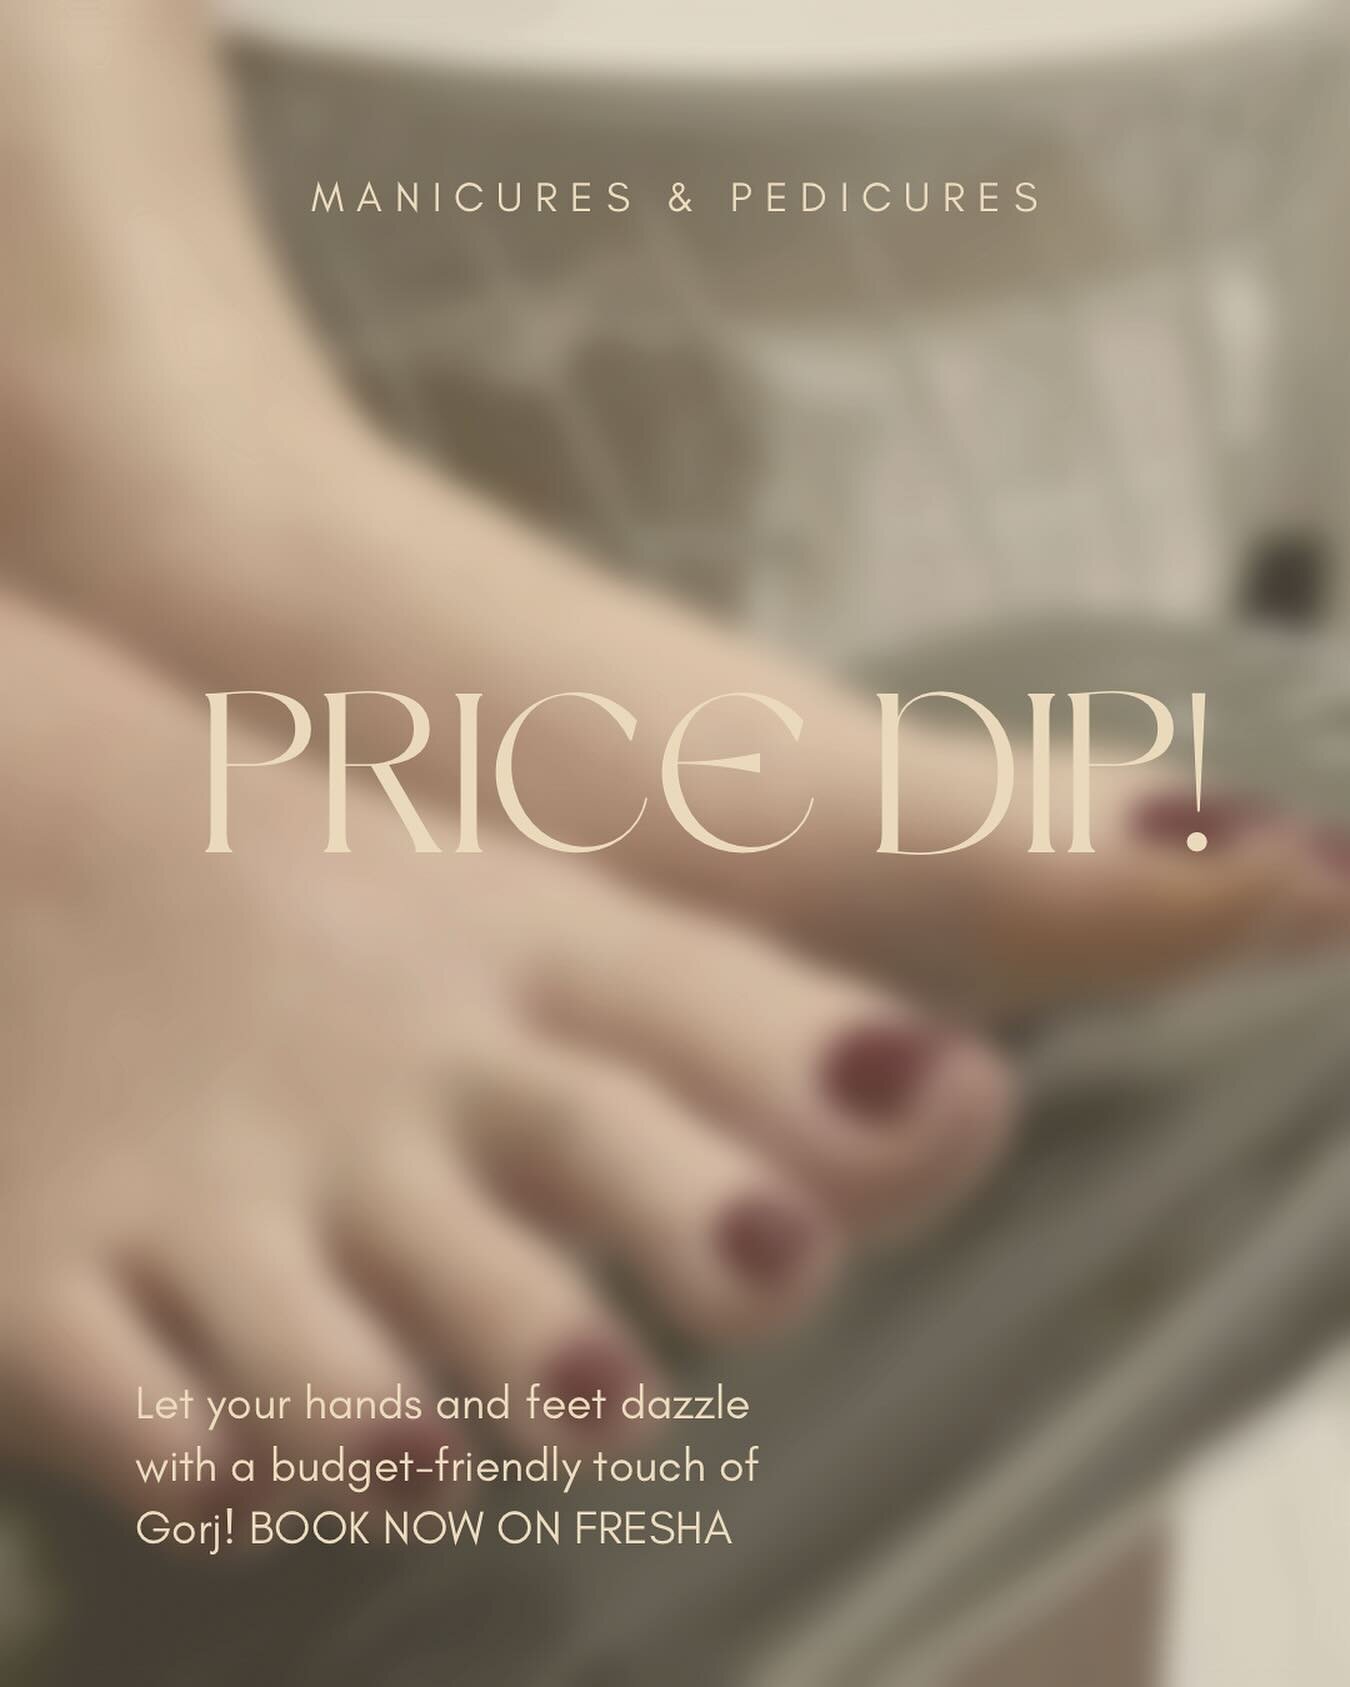 P r i c e  d i p  a l e r t 💅🏻✨ Manis &amp; pedis are now cheaper! Let your hands and feet dazzle with a budget-friendly touch of Gorj! BOOK NOW ON FRESHA 📲💷

#pedicure #manicure #beauty #nails #gorj #gorjstrood #strood #gorjbeauty